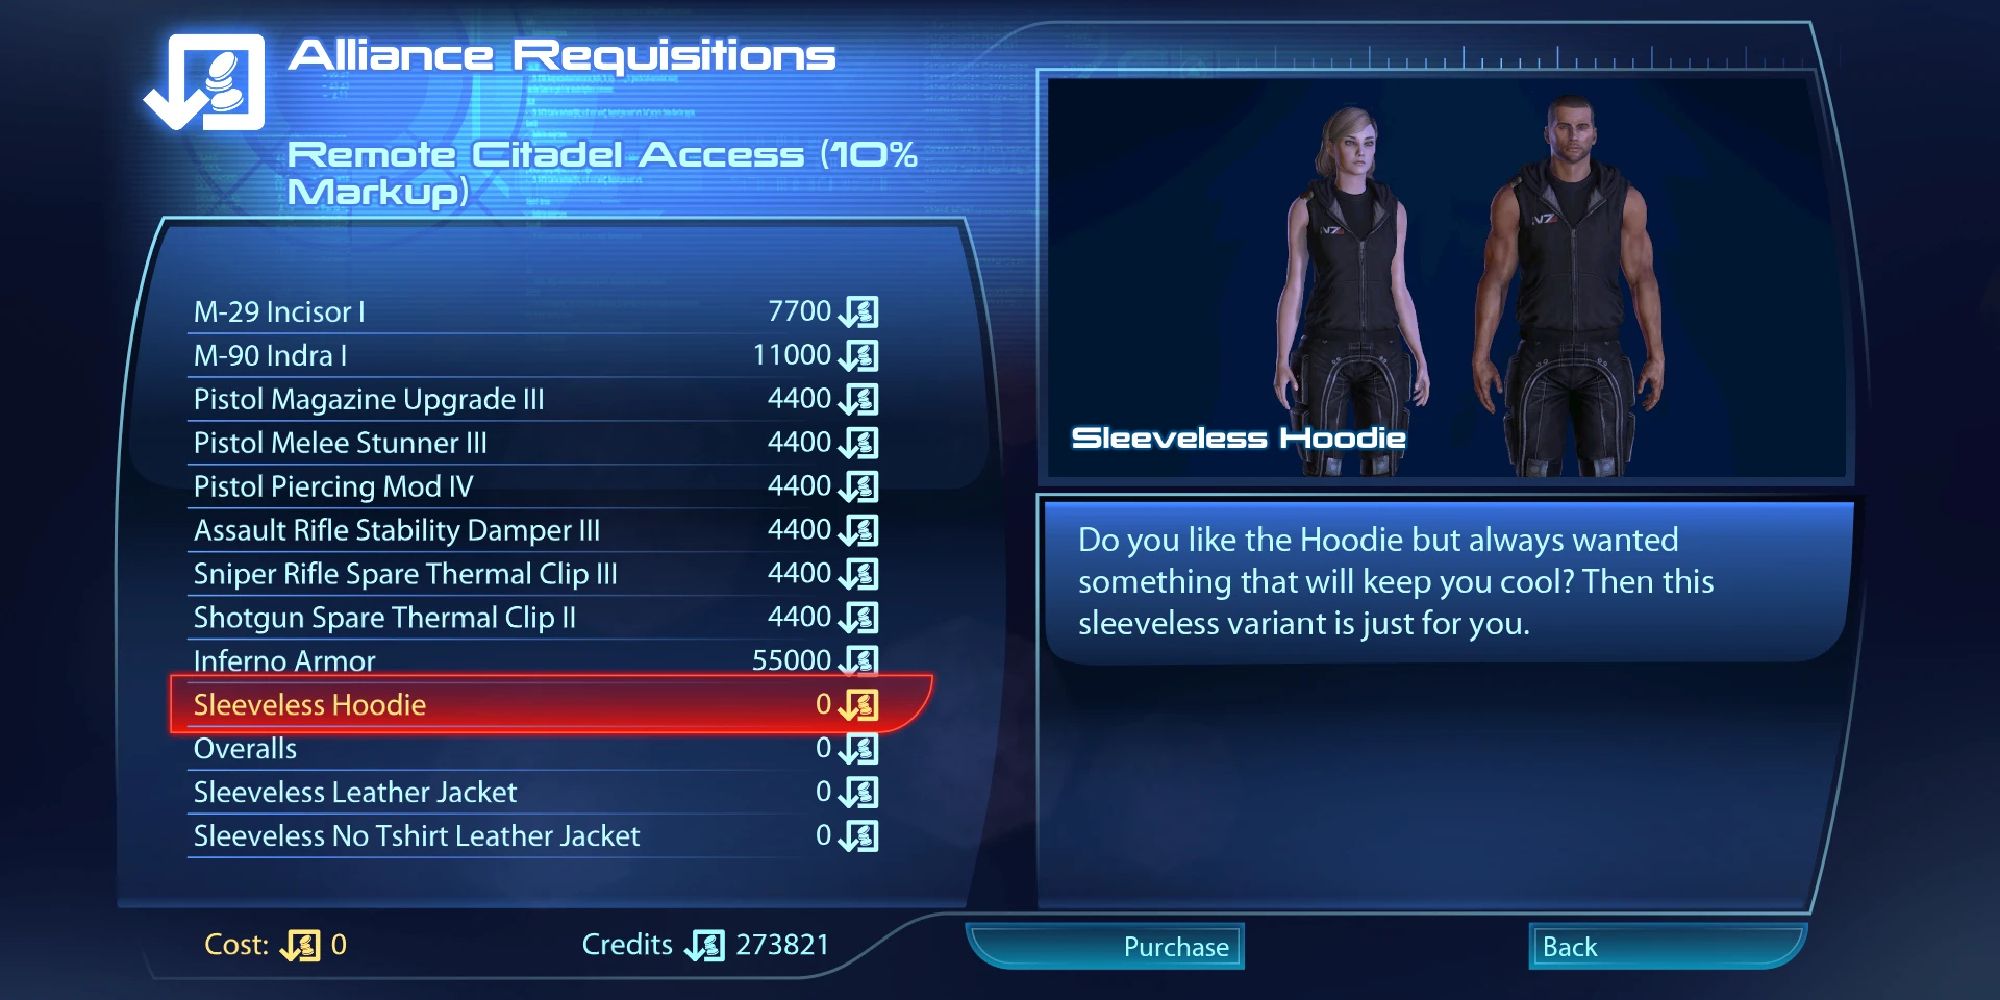 Screenshot showing some of the additional outfits in-store